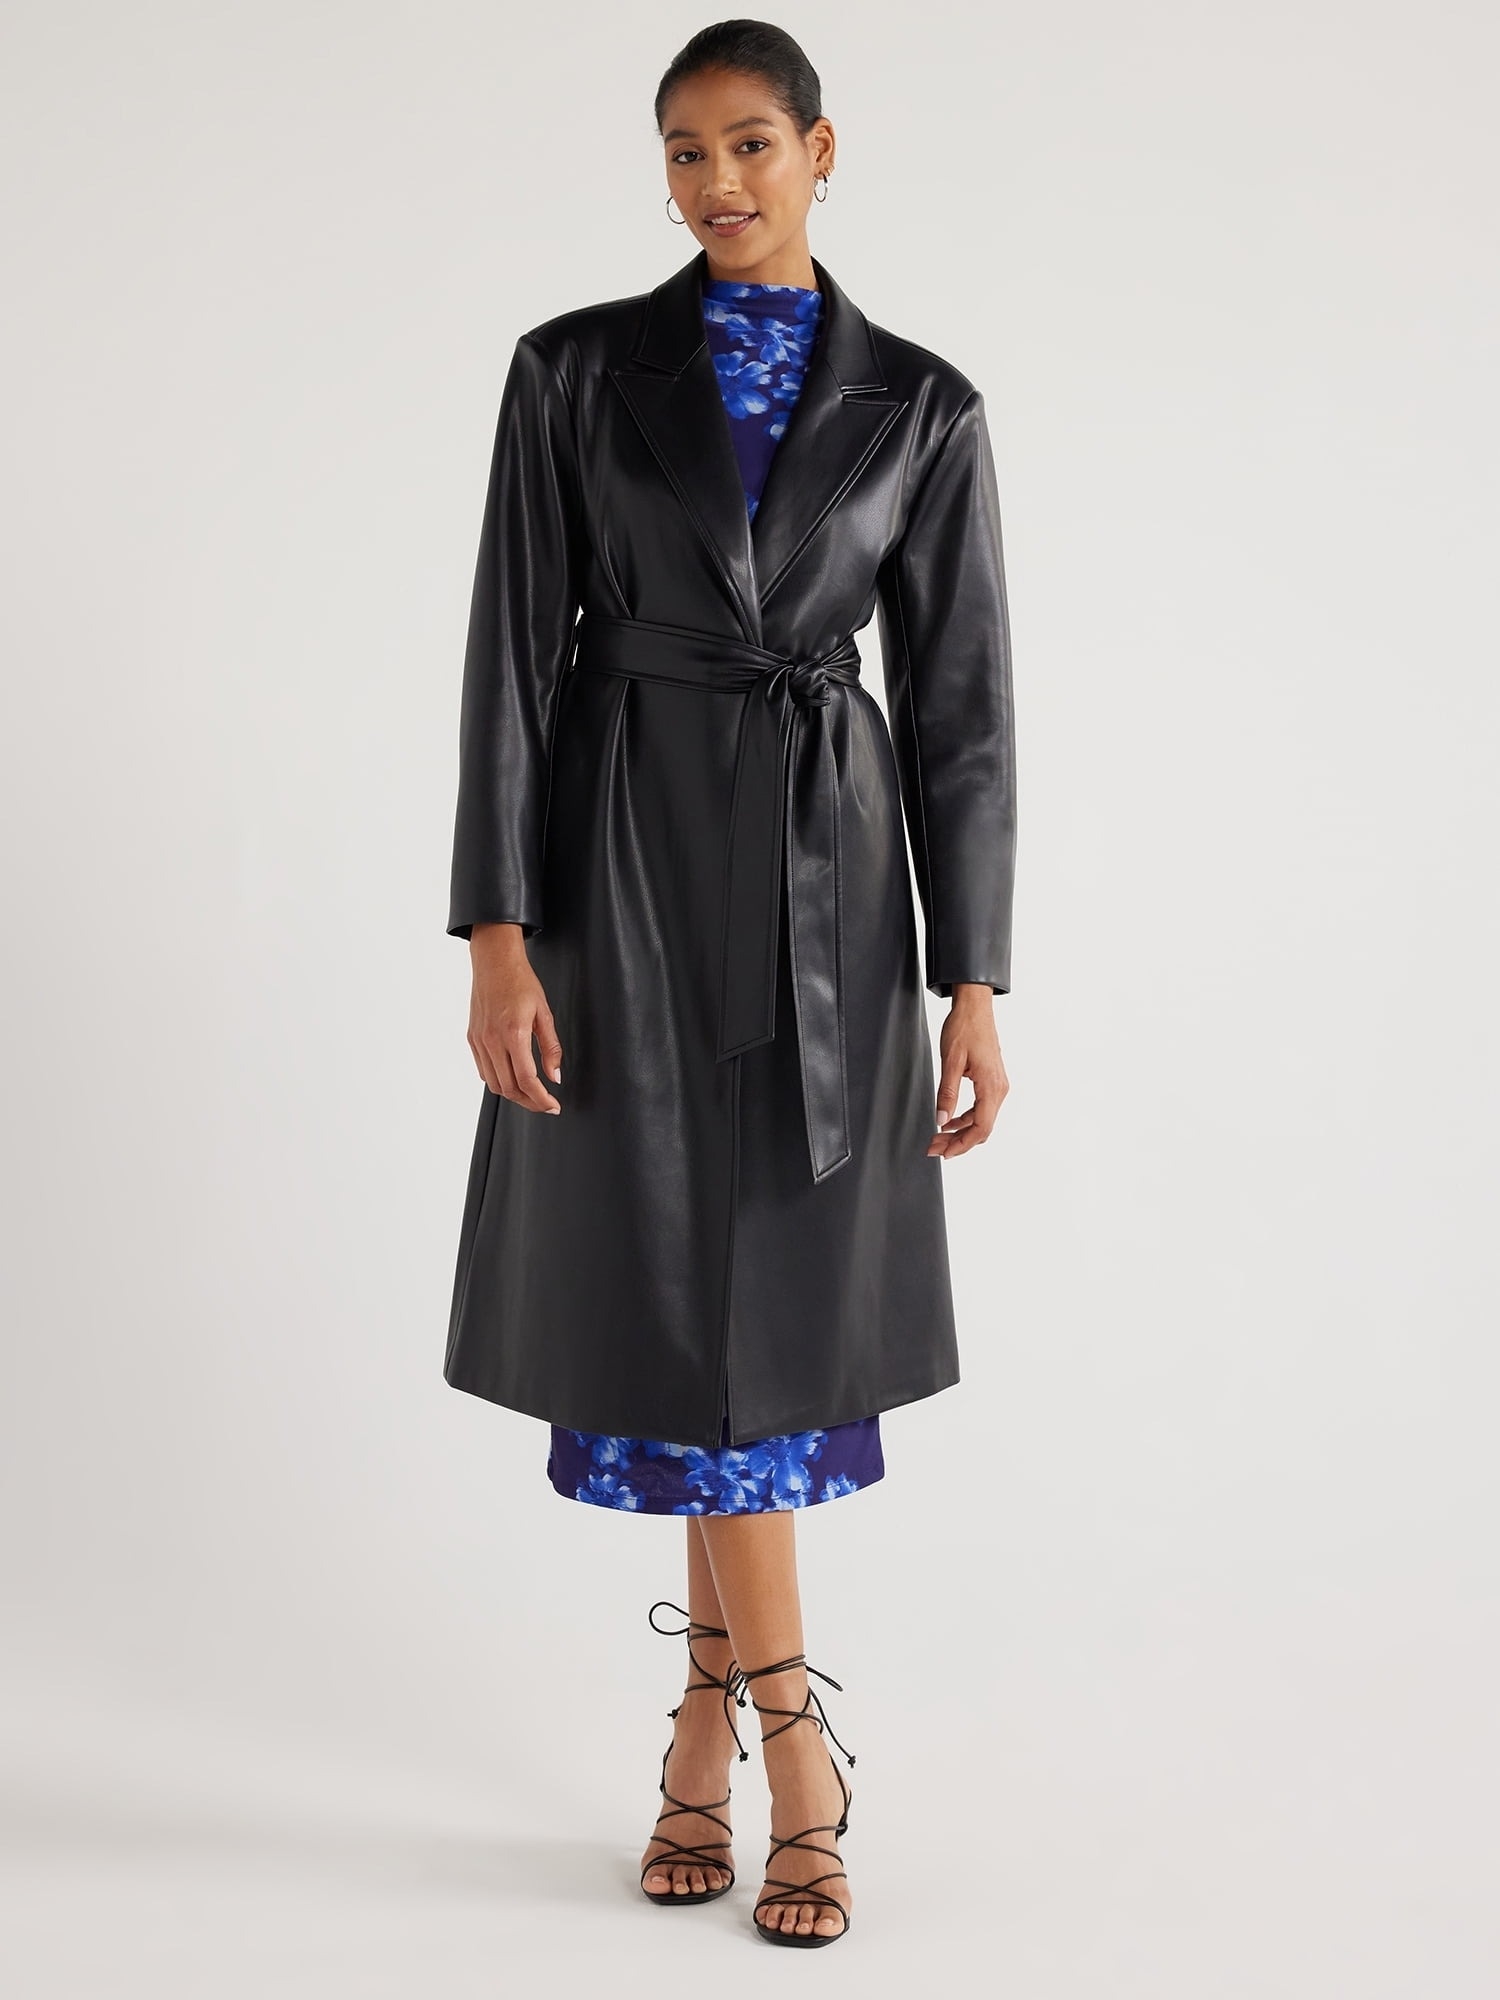 model in a black trench coat over a blue dress, paired with strappy sandals